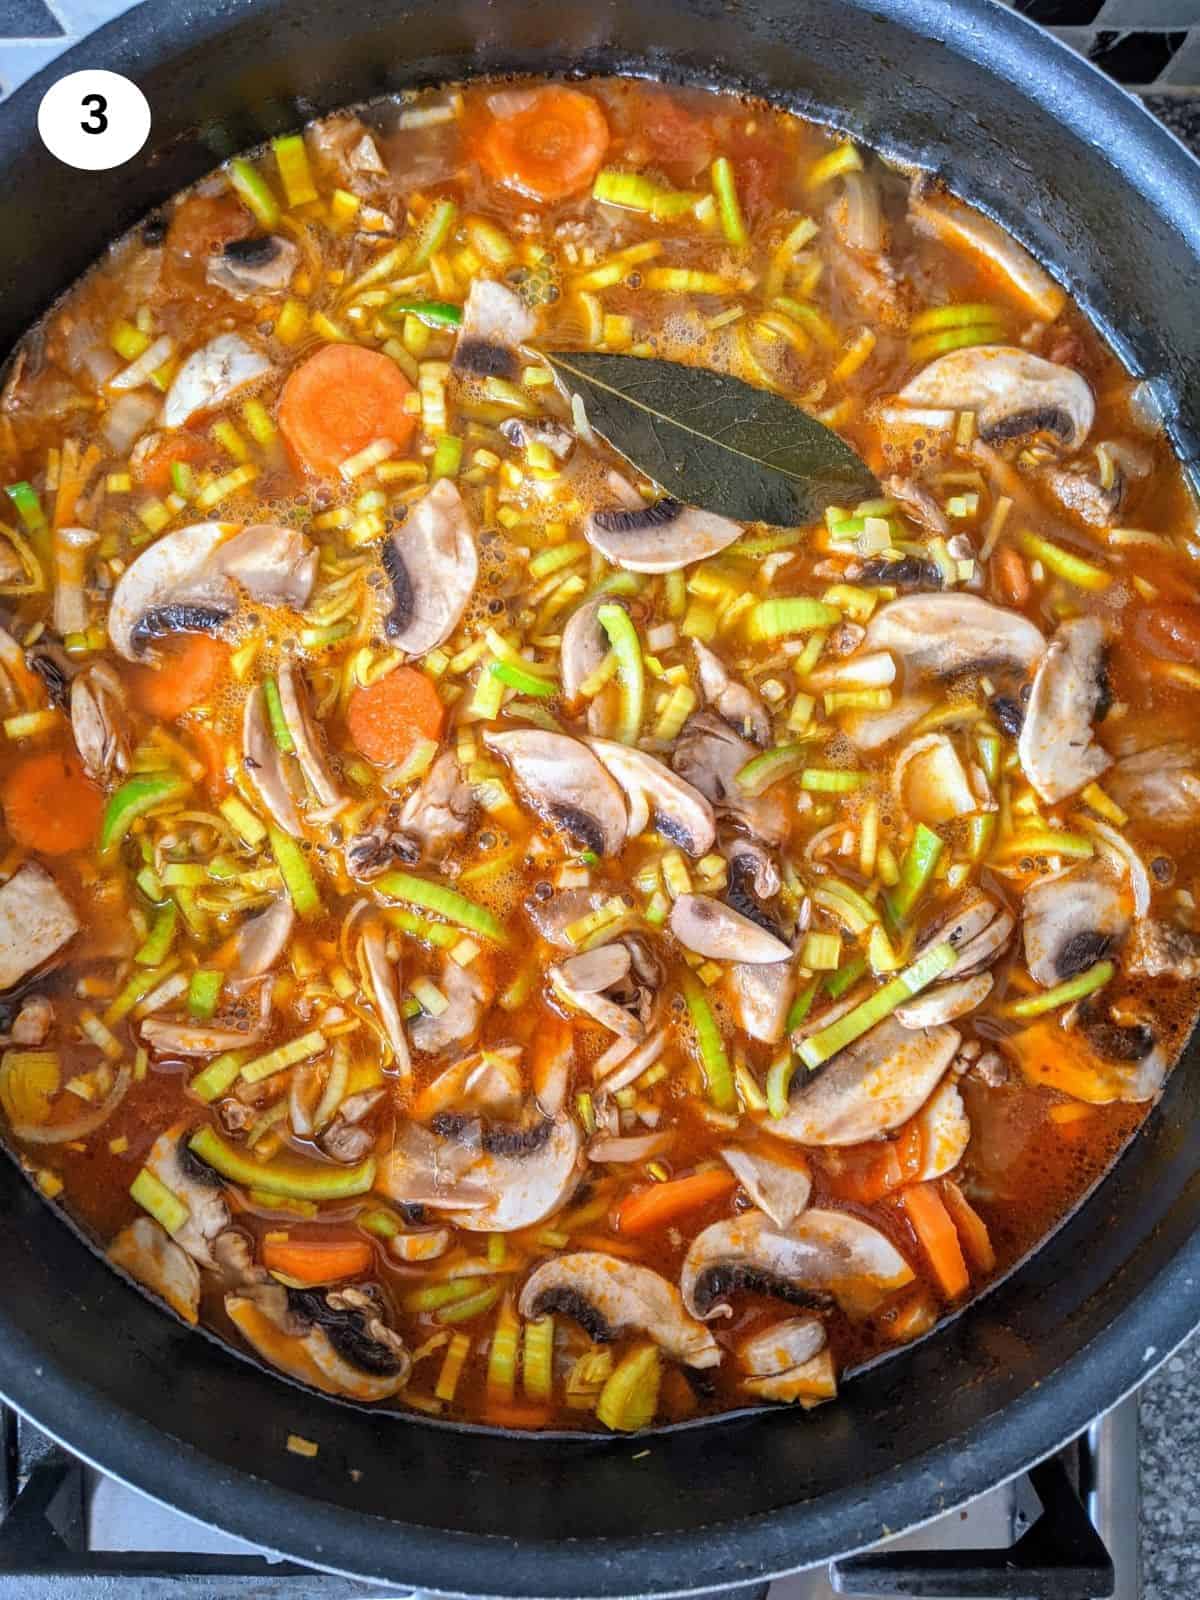 Beef with veggies in the pot.